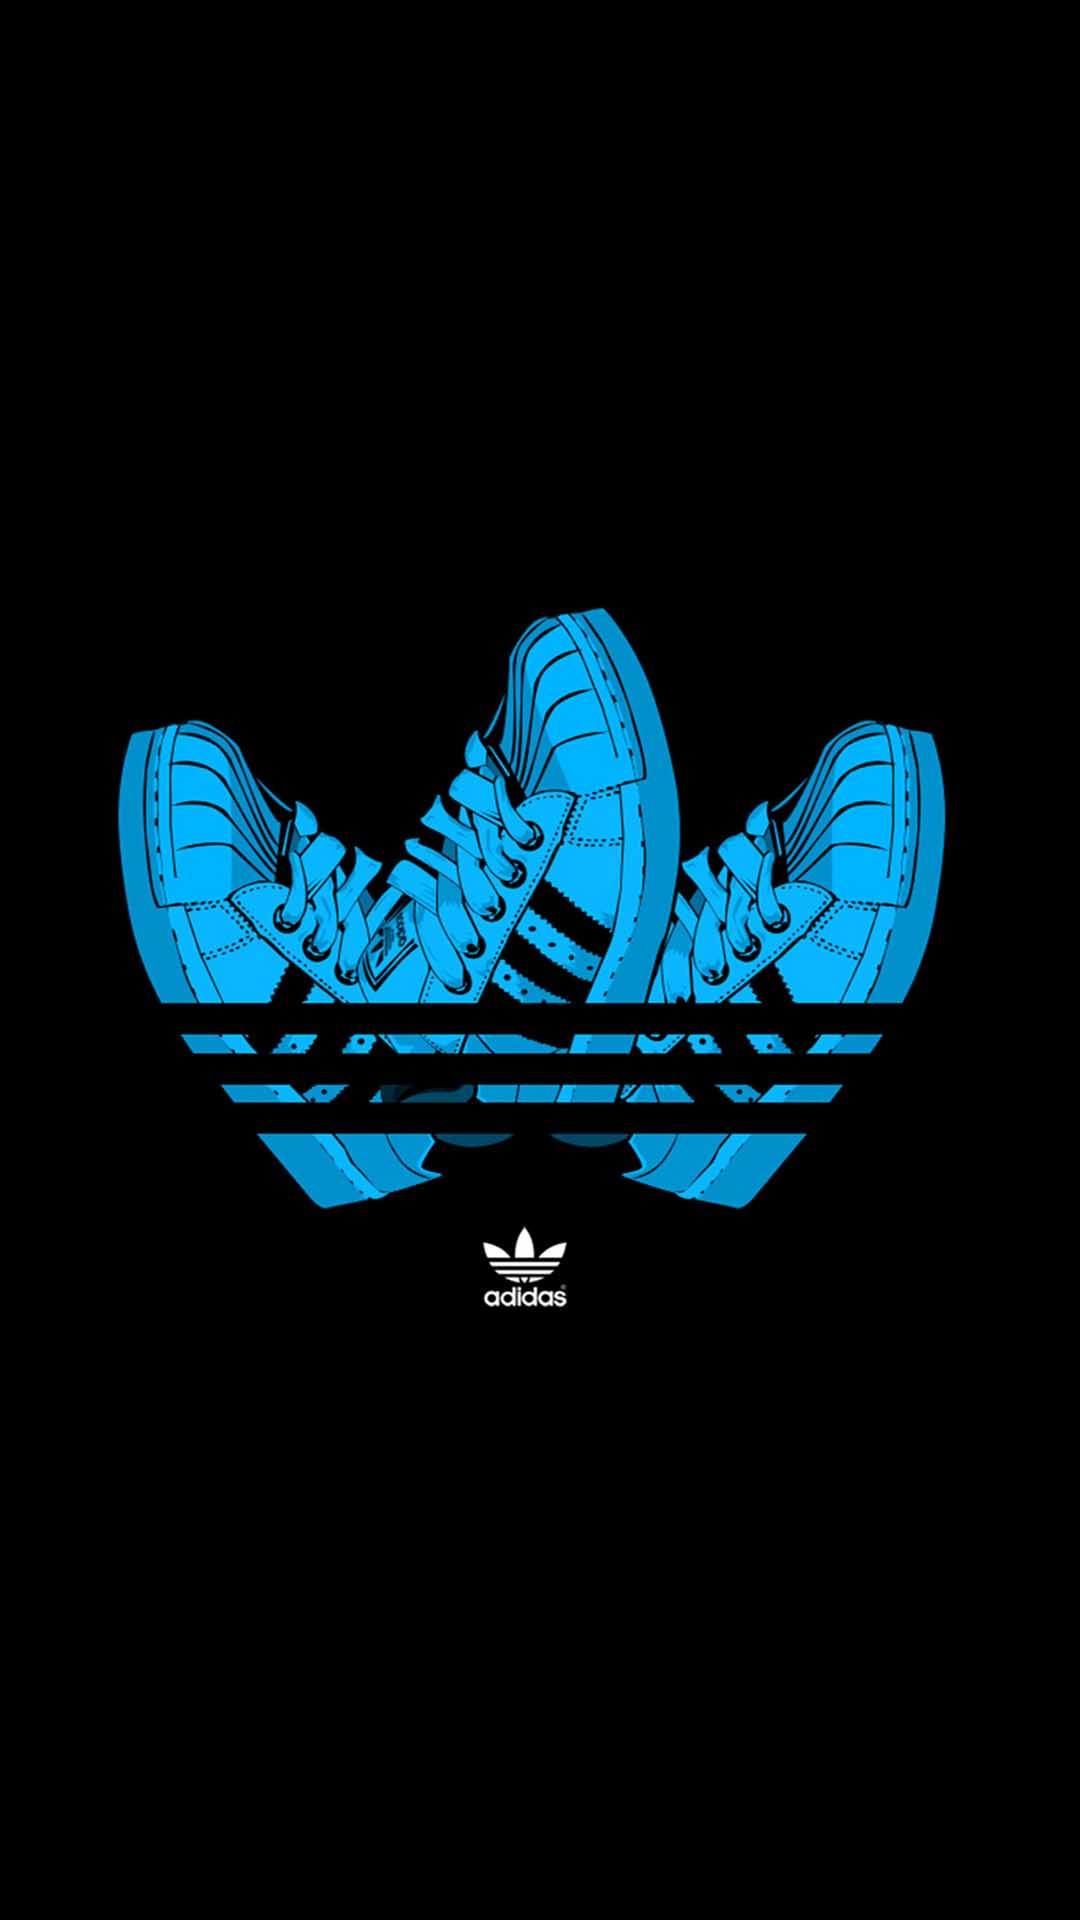 Free Download New Iphone Wallpaper Iphone Wallpaper 1080x19 For Your Desktop Mobile Tablet Explore 52 Adidas Wallpapers For Iphone Adidas Logo Wallpaper Adidas Wallpapers 19 X 1080 Cool Adidas Wallpapers